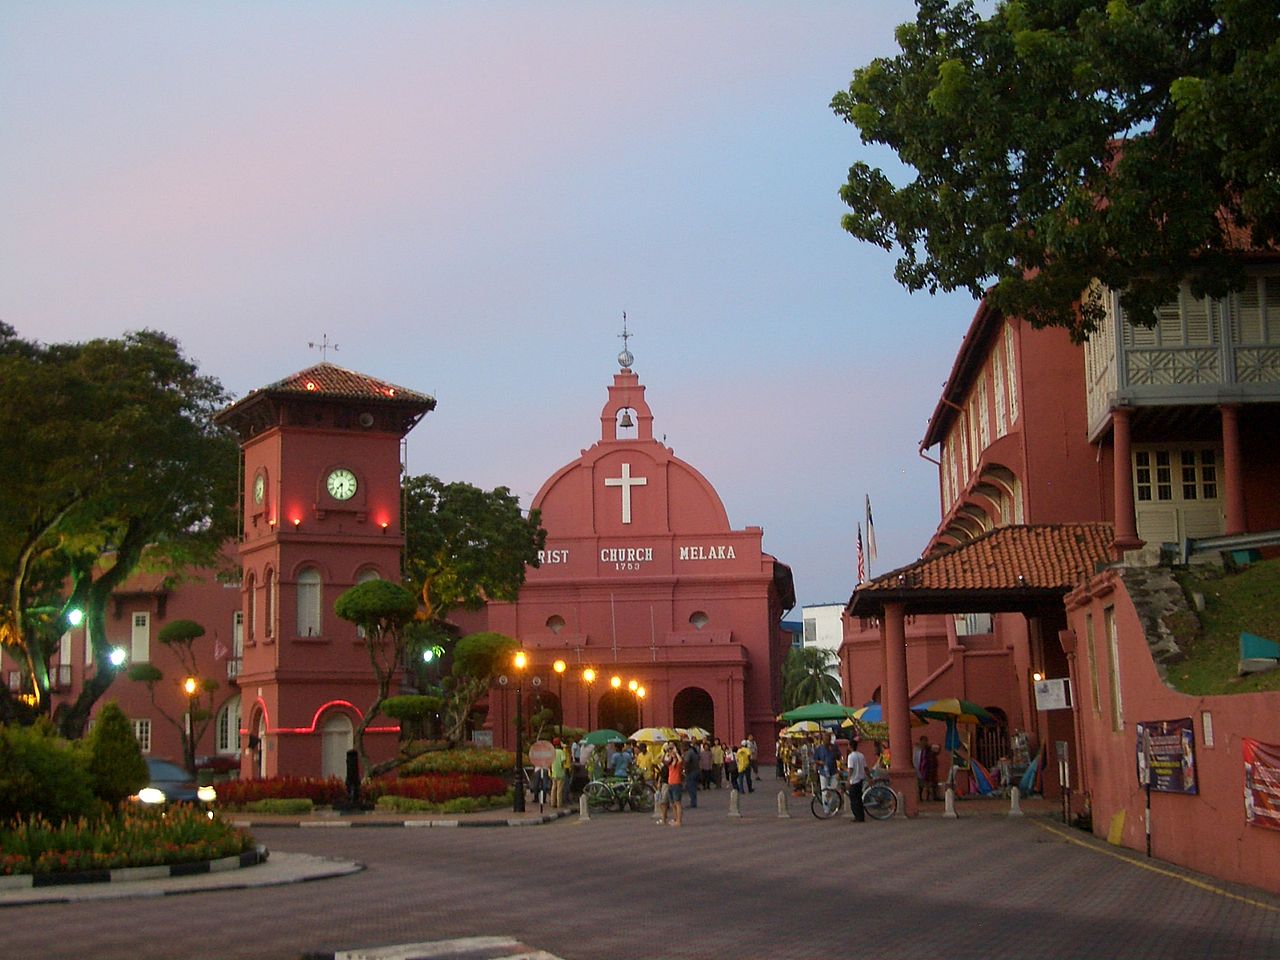 A view of Dutch square in Melaka, with Christ Church in the center. Foto CC 3.0 by Vmenkov